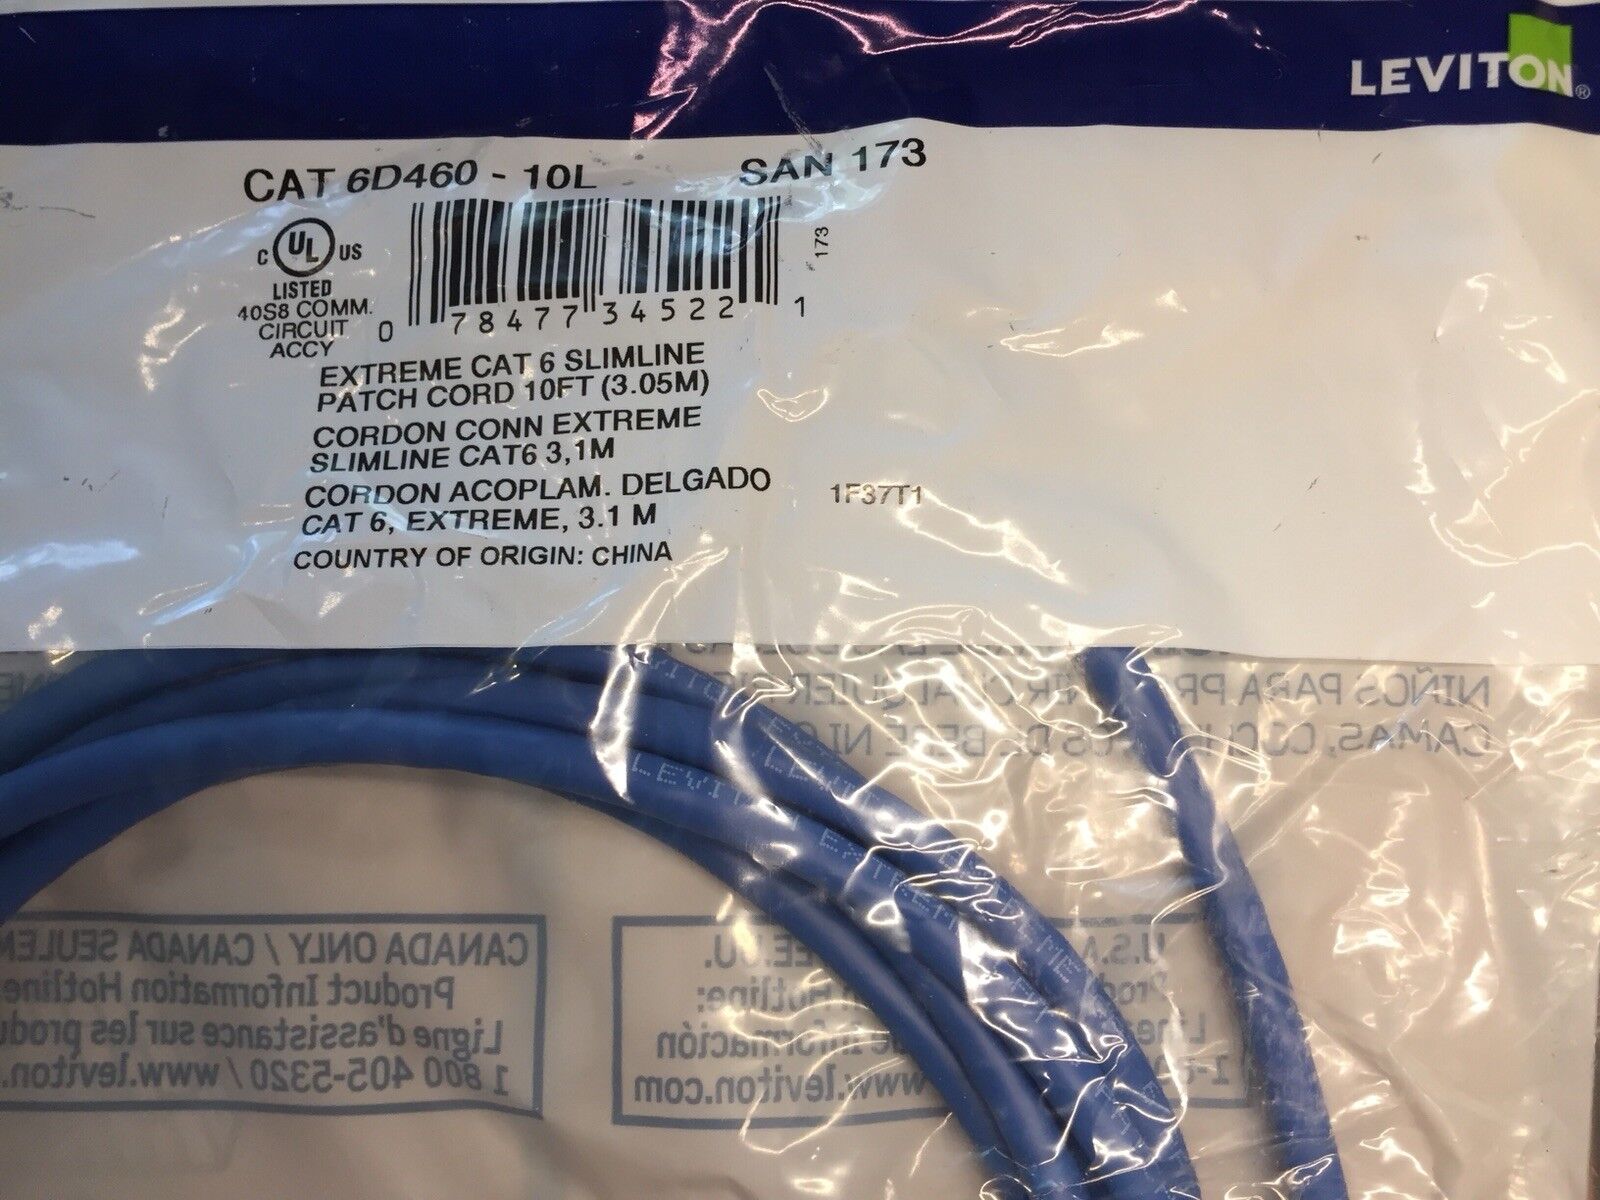 NEW Extreme CAT6 Patch Slimline Blue Network Cable 10 FT length by Leviton